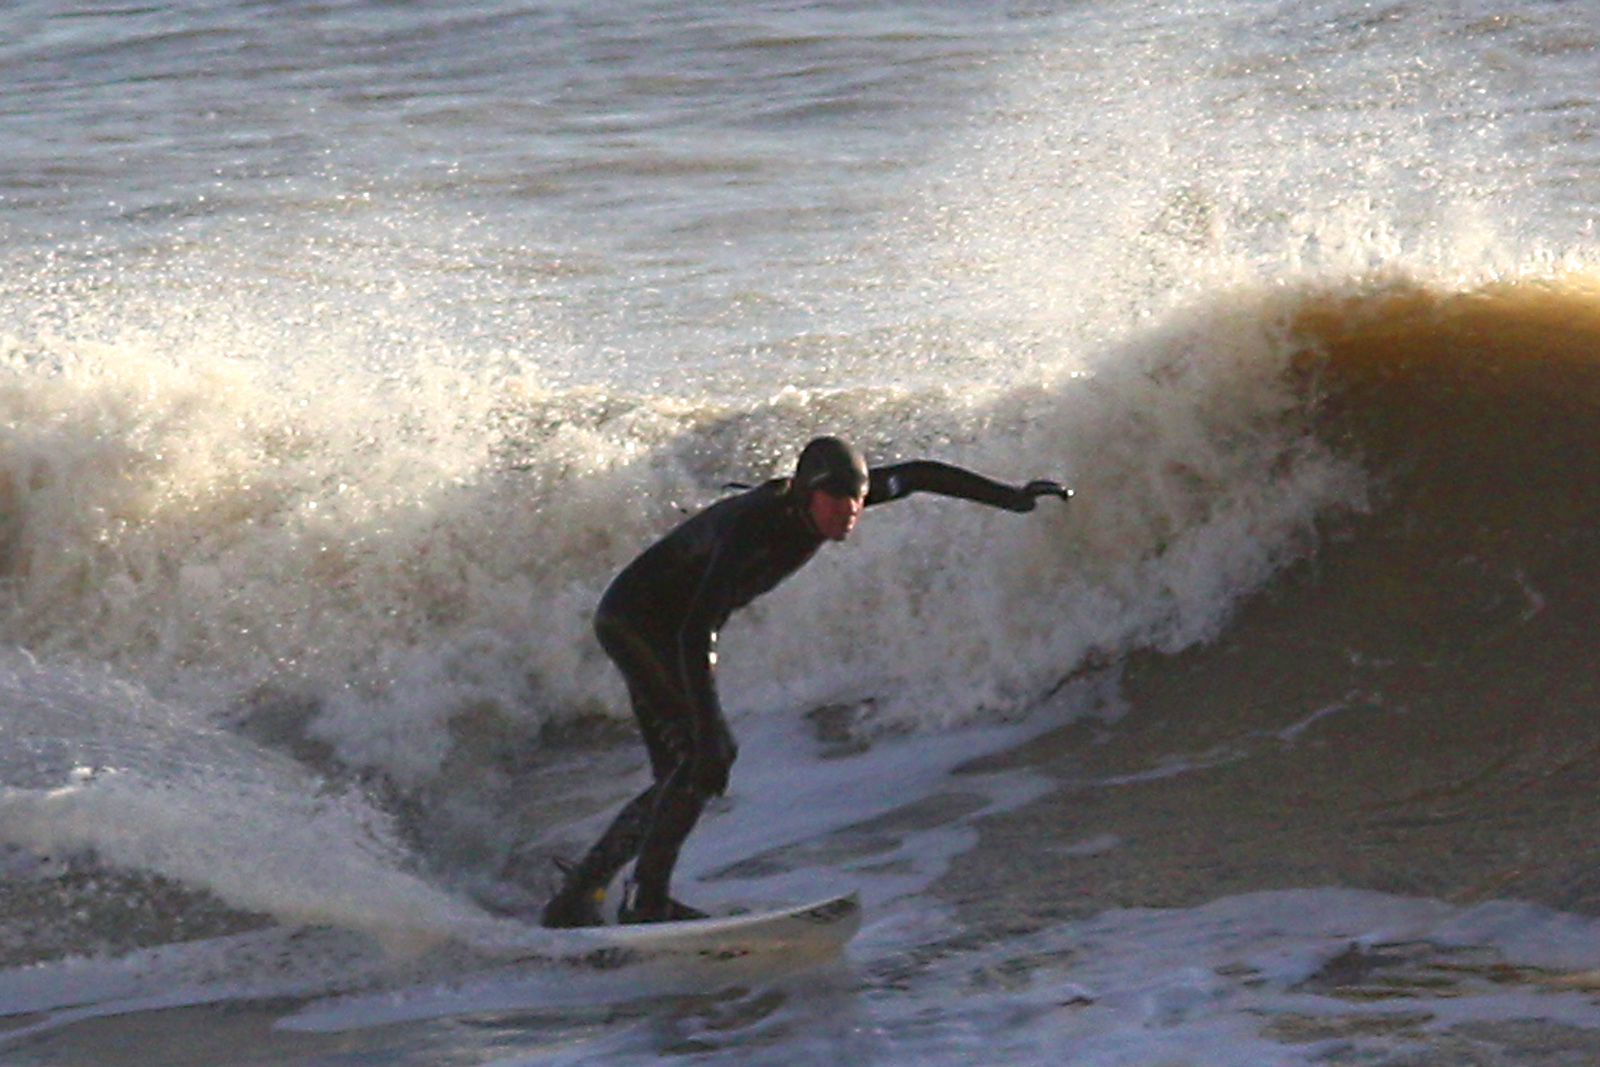 a man surfing on a wave with his arms up